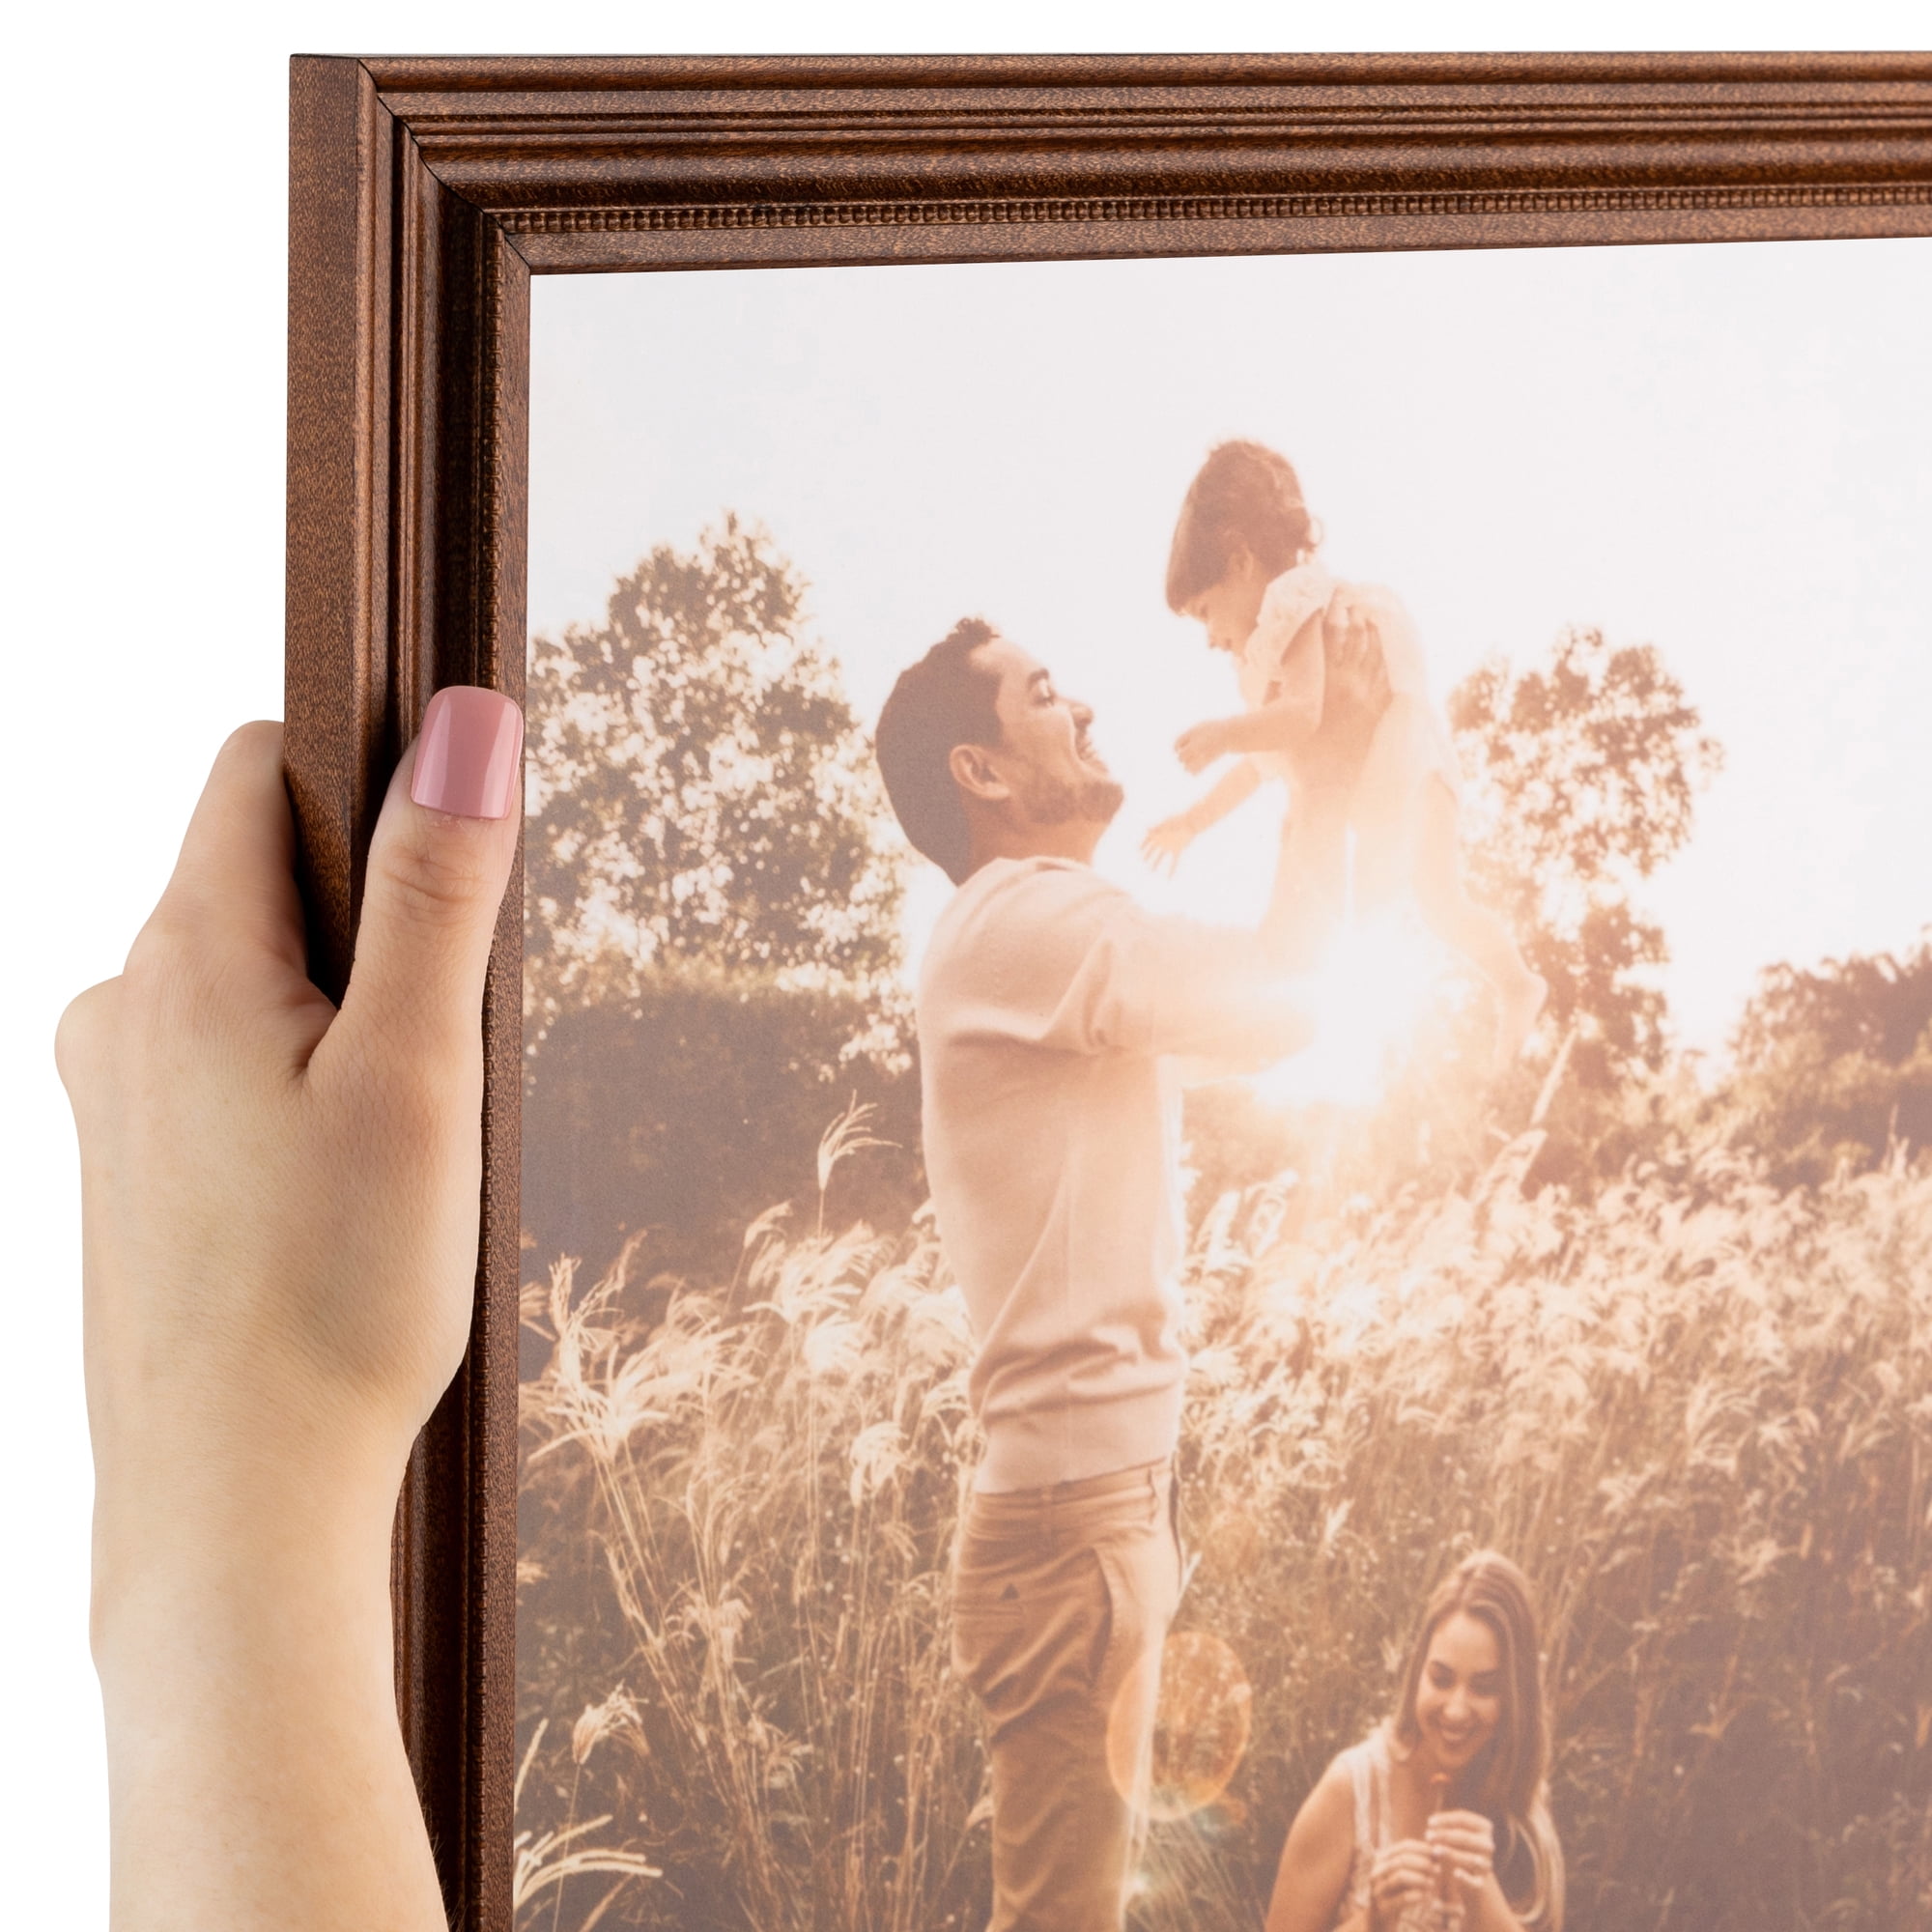 ArtToFrames 16x24 inch Windsor Walnut Picture Frame, This Brown MDF Poster Frame Is Great for Your Art or Photos, Comes with Styrene (4686), Size: 16